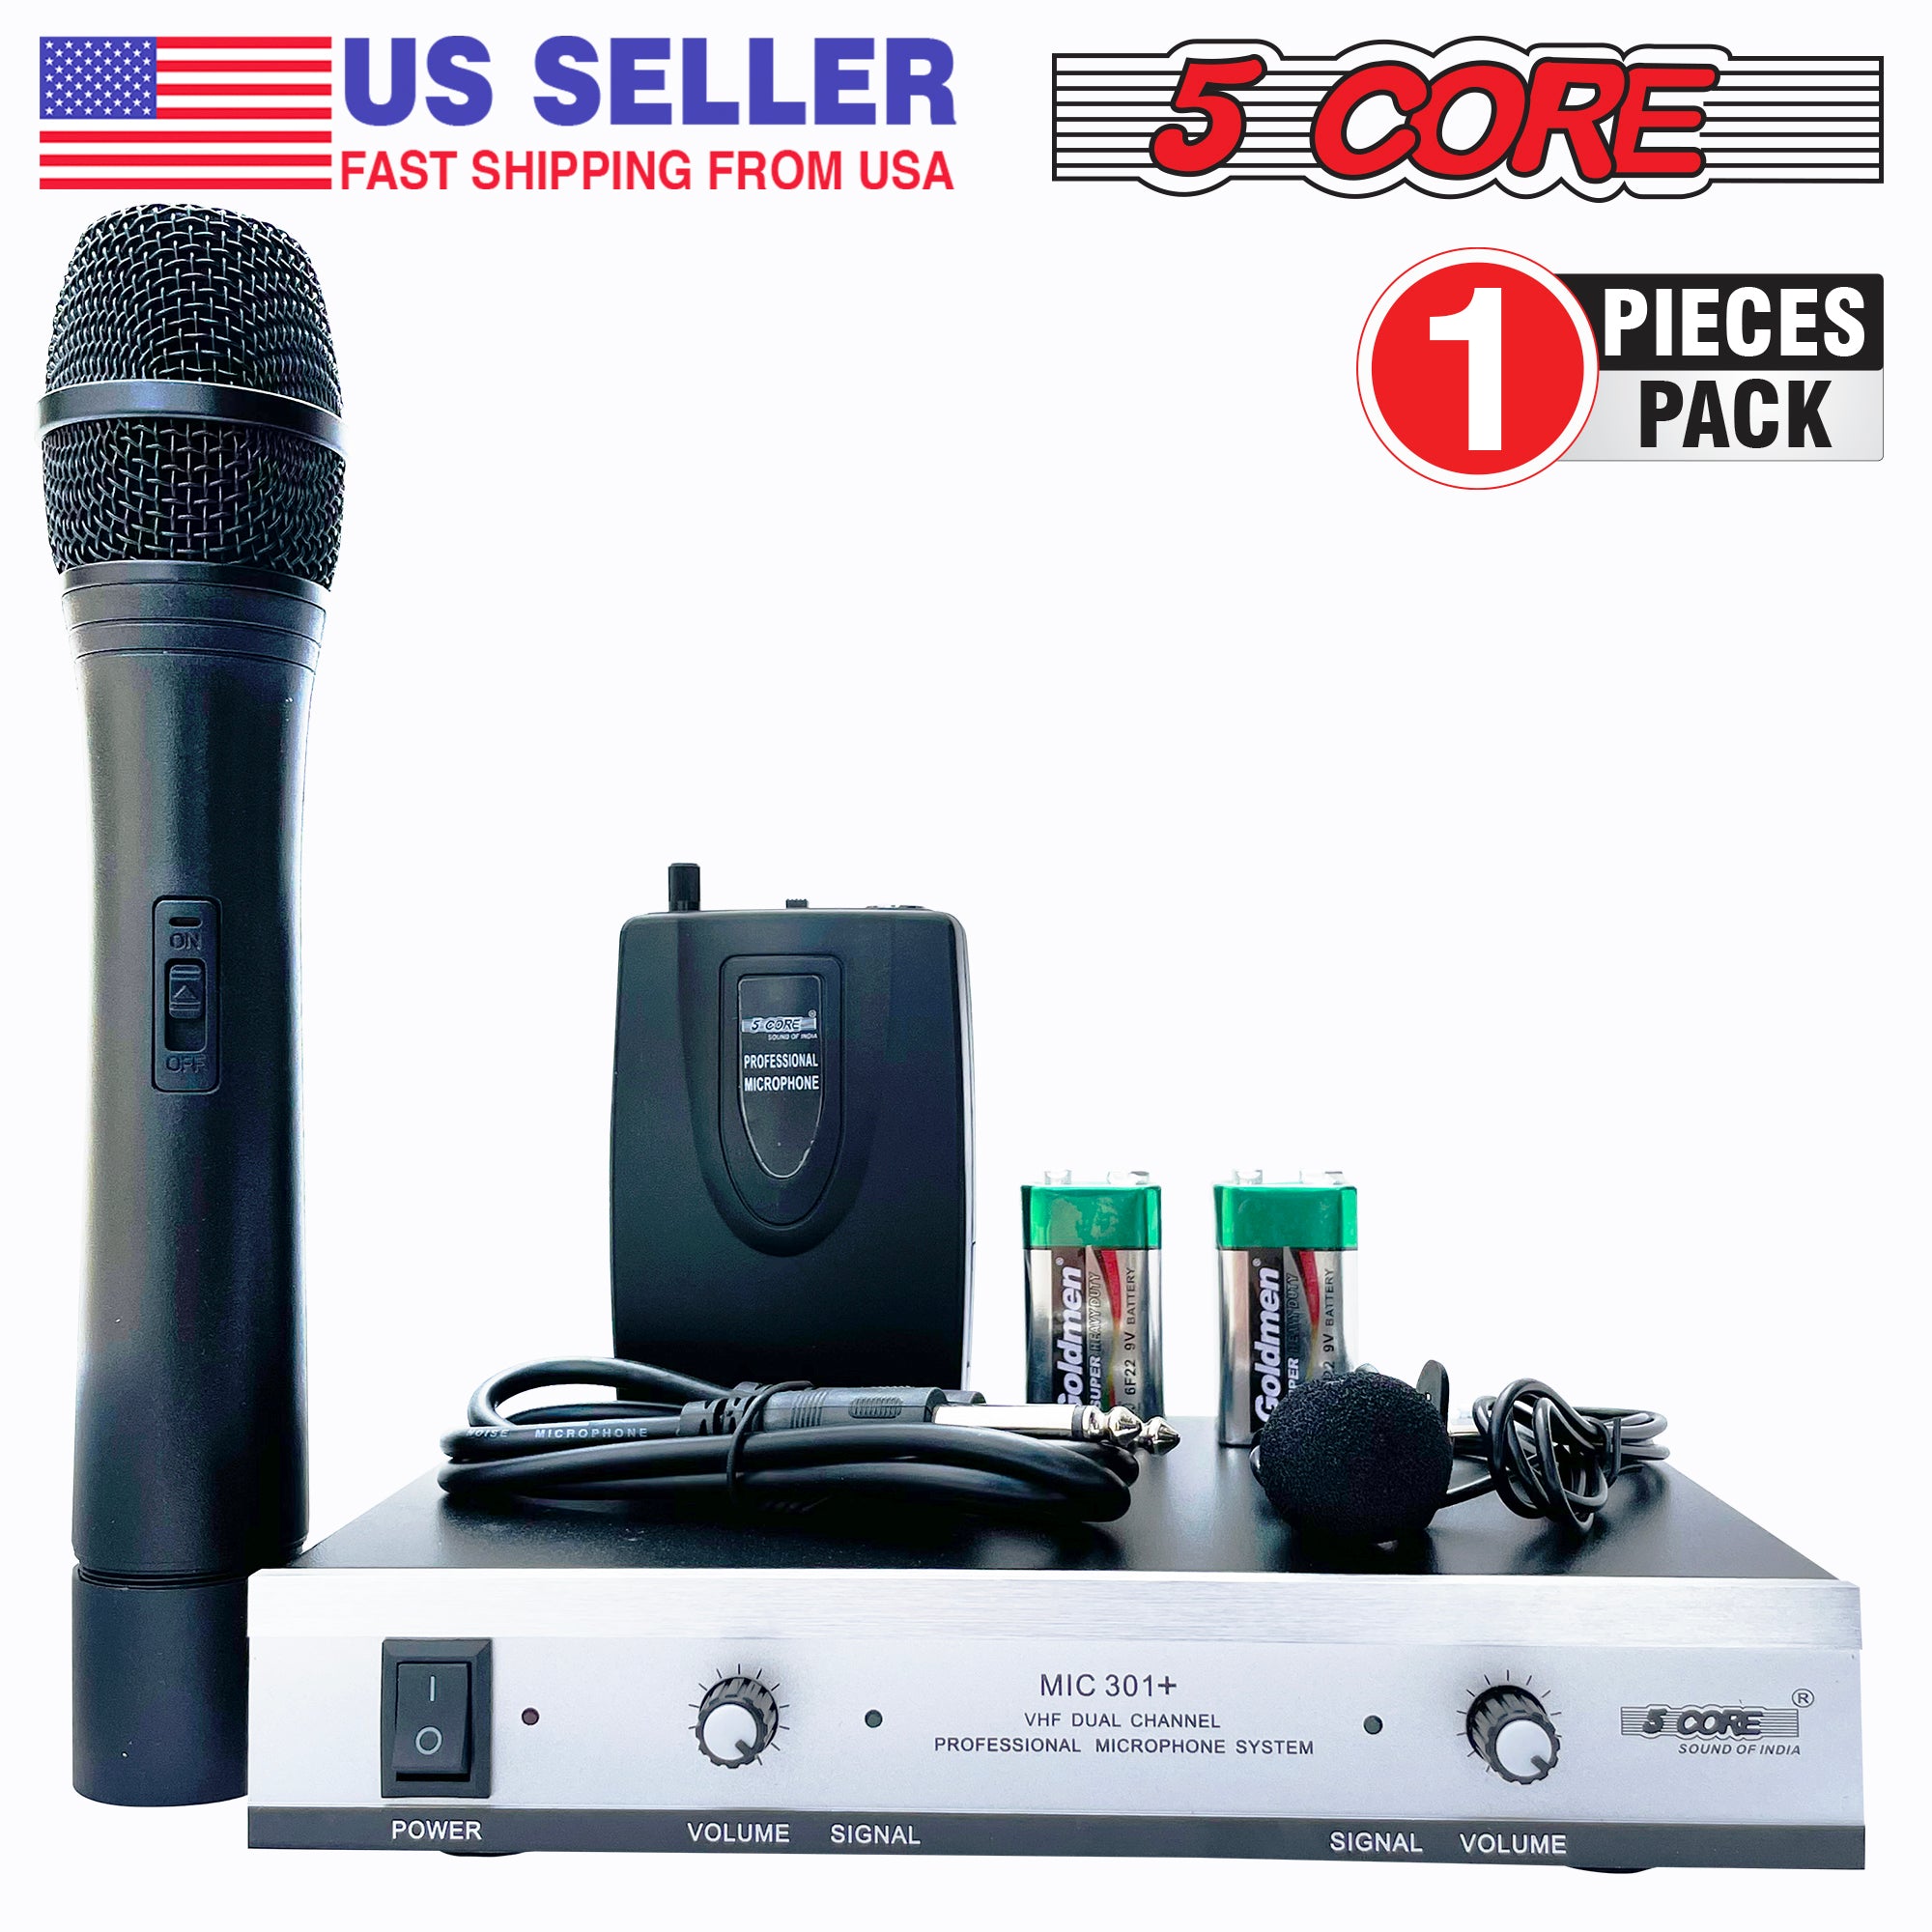 5Core Wireless Microphones w 1 VHF Dynamic Unidirectional Handheld Microfono Inalambrico & 1 Collar Mic with Receiver